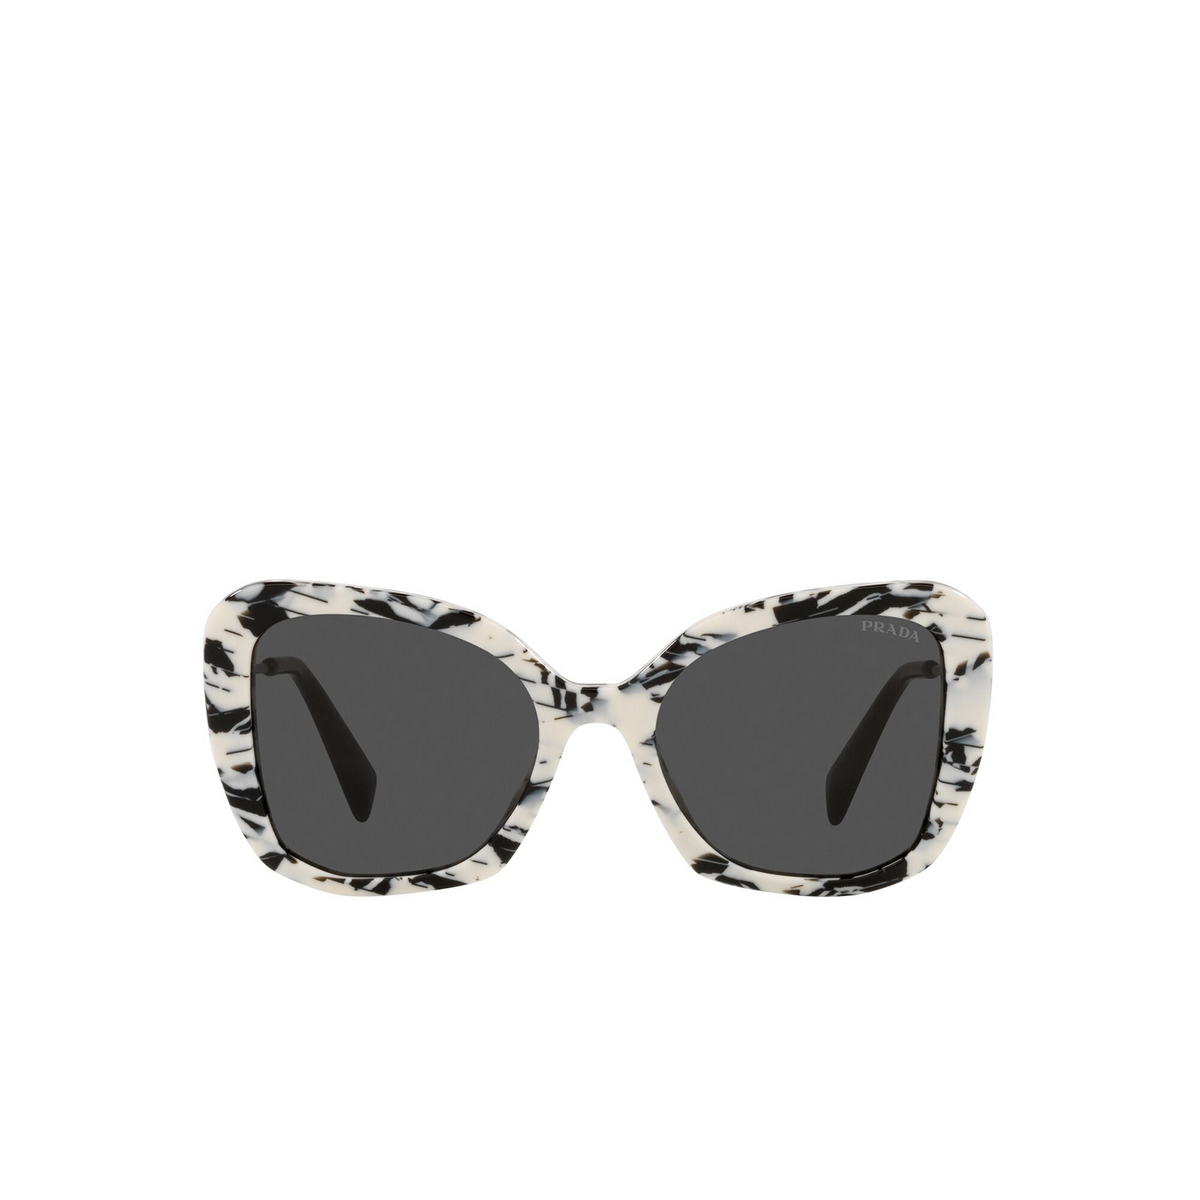 Prada® Butterfly Sunglasses: PR 03YS color Abstract Talc 02Y5S0 - front view.